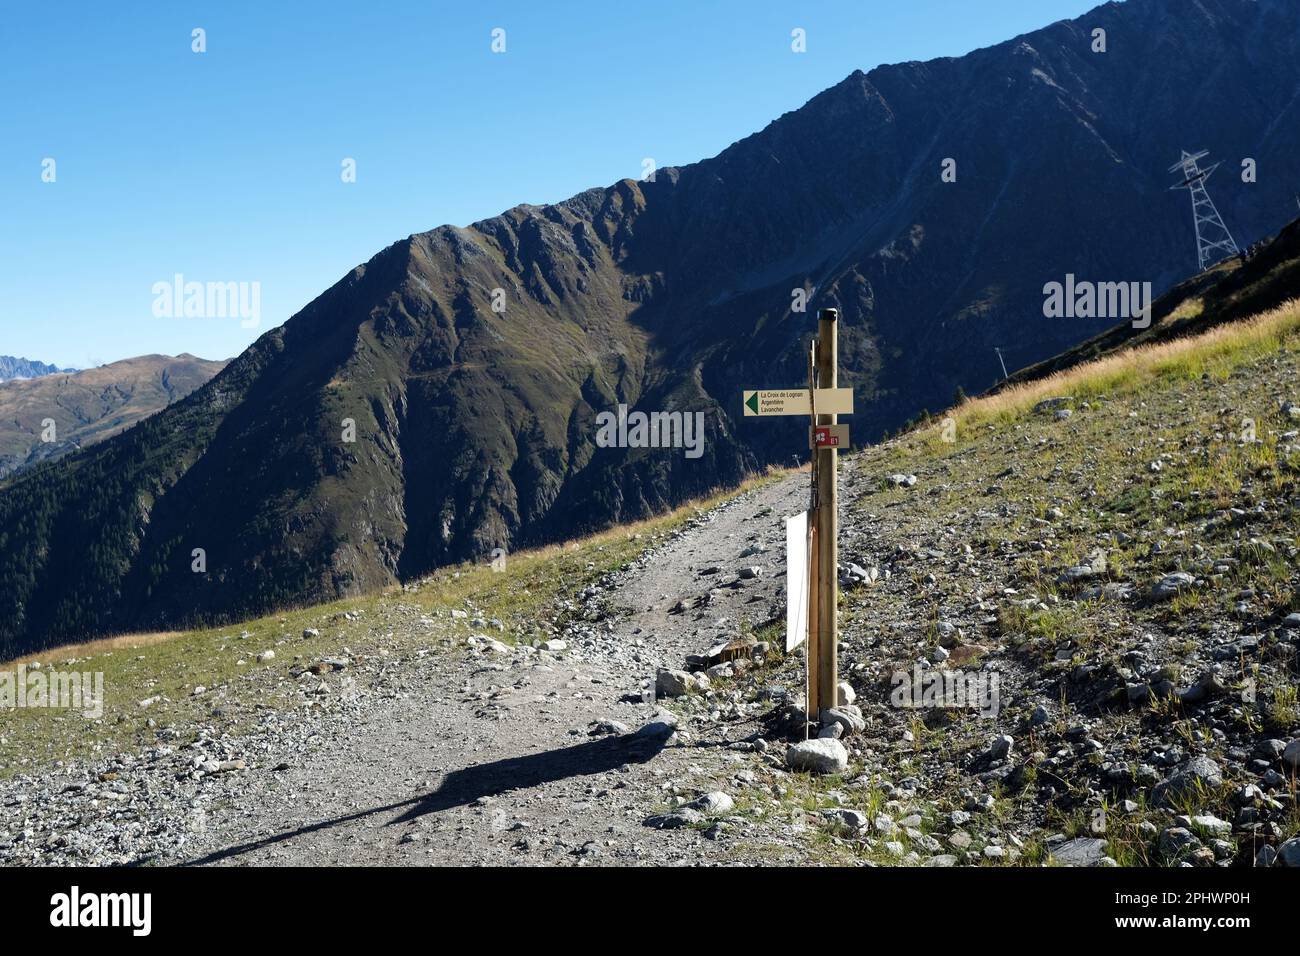 On the trail , directional sign to Argentiere Glacier, Chamonix area, Haute Savoie, France. Stock Photo